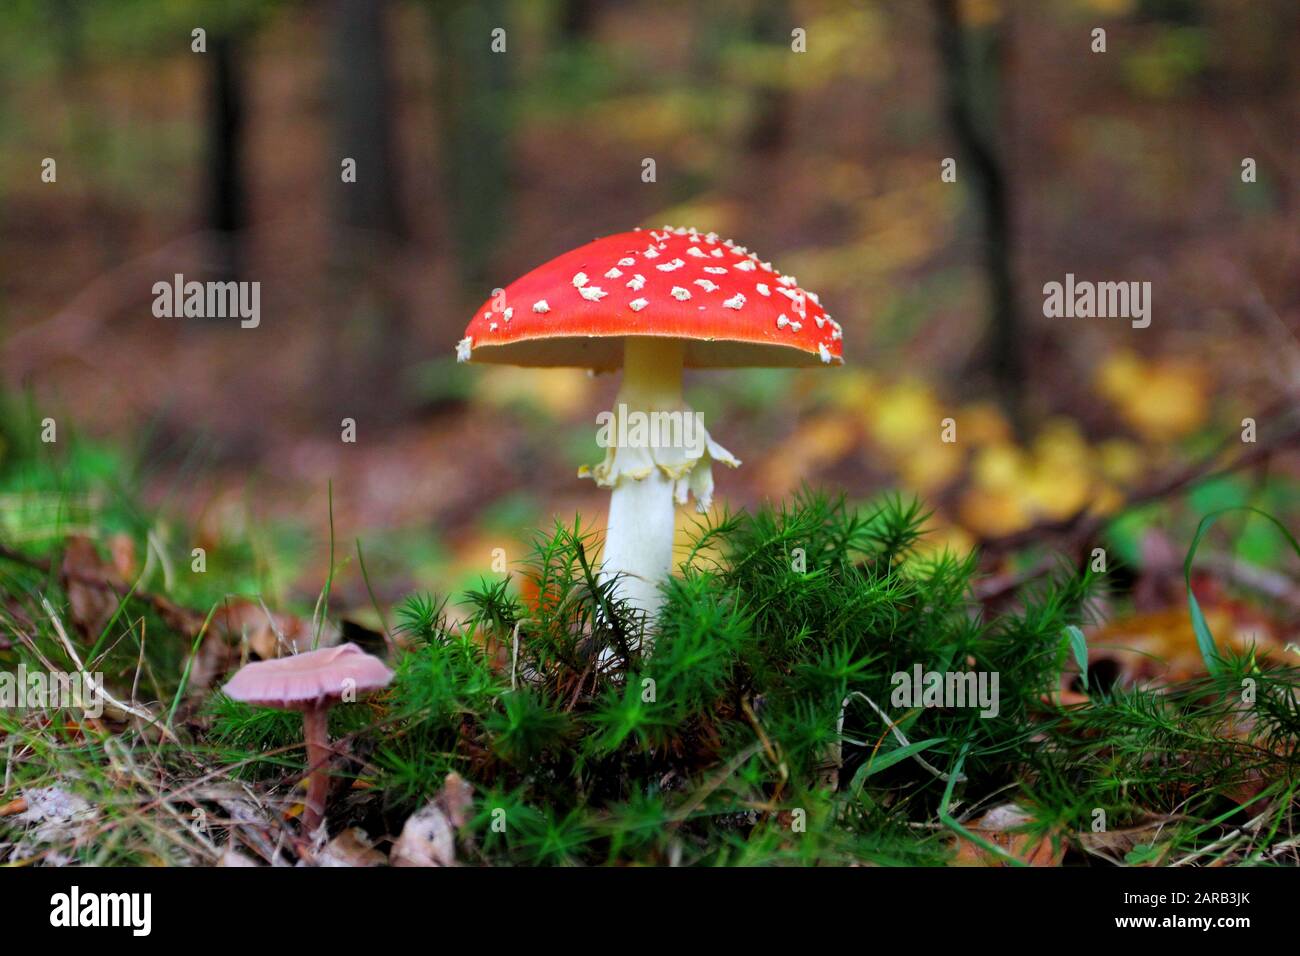 Amanita muscaria, commonly known as the fly agaric growing in the forest Stock Photo